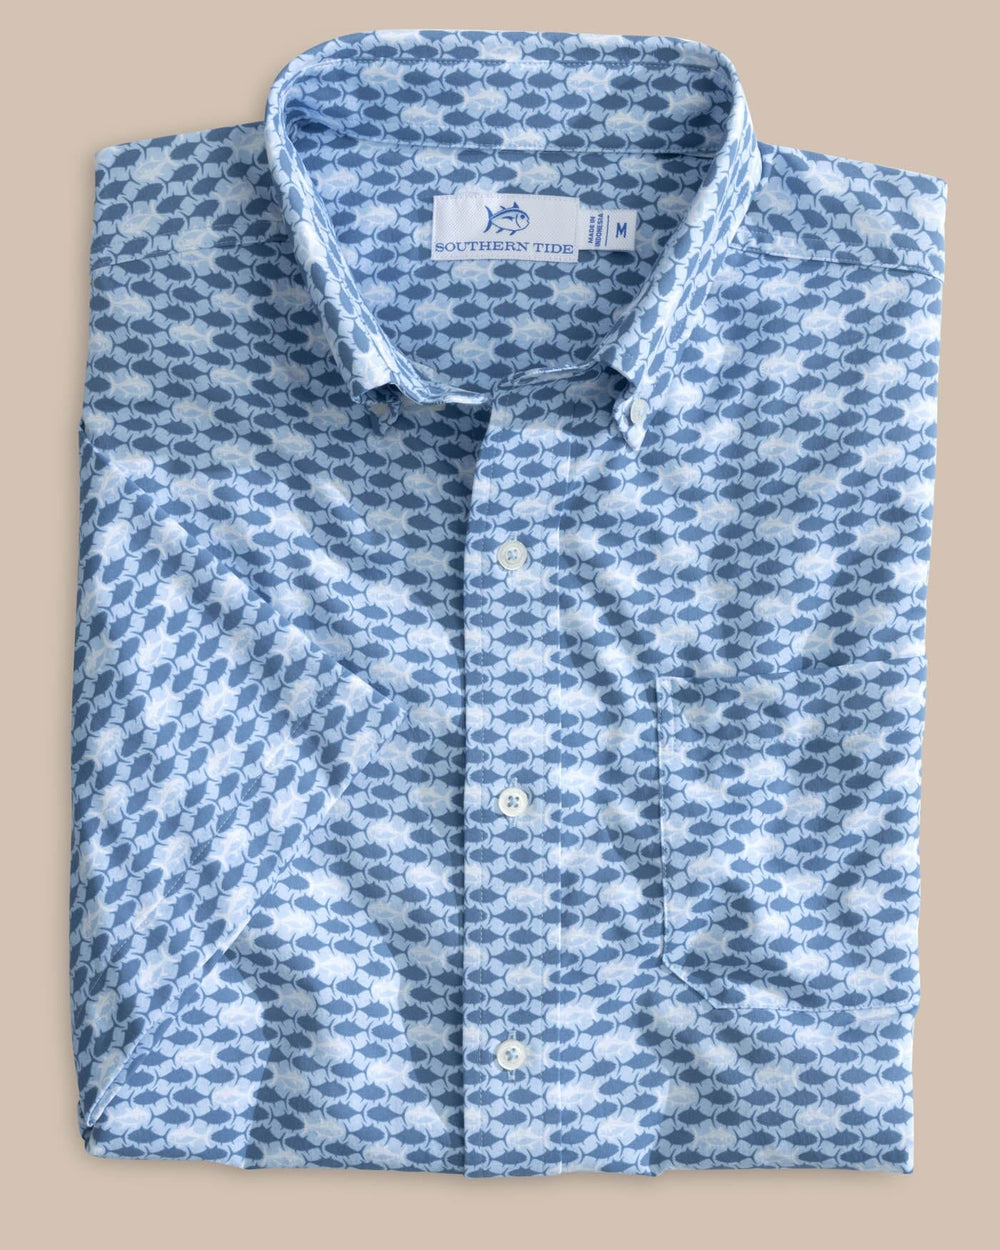 The front view of the Southern Tide Intercoastal Heather Skipping Jacks Short Sleeve Sportshirt by Southern Tide - Heather Clearwater Blue